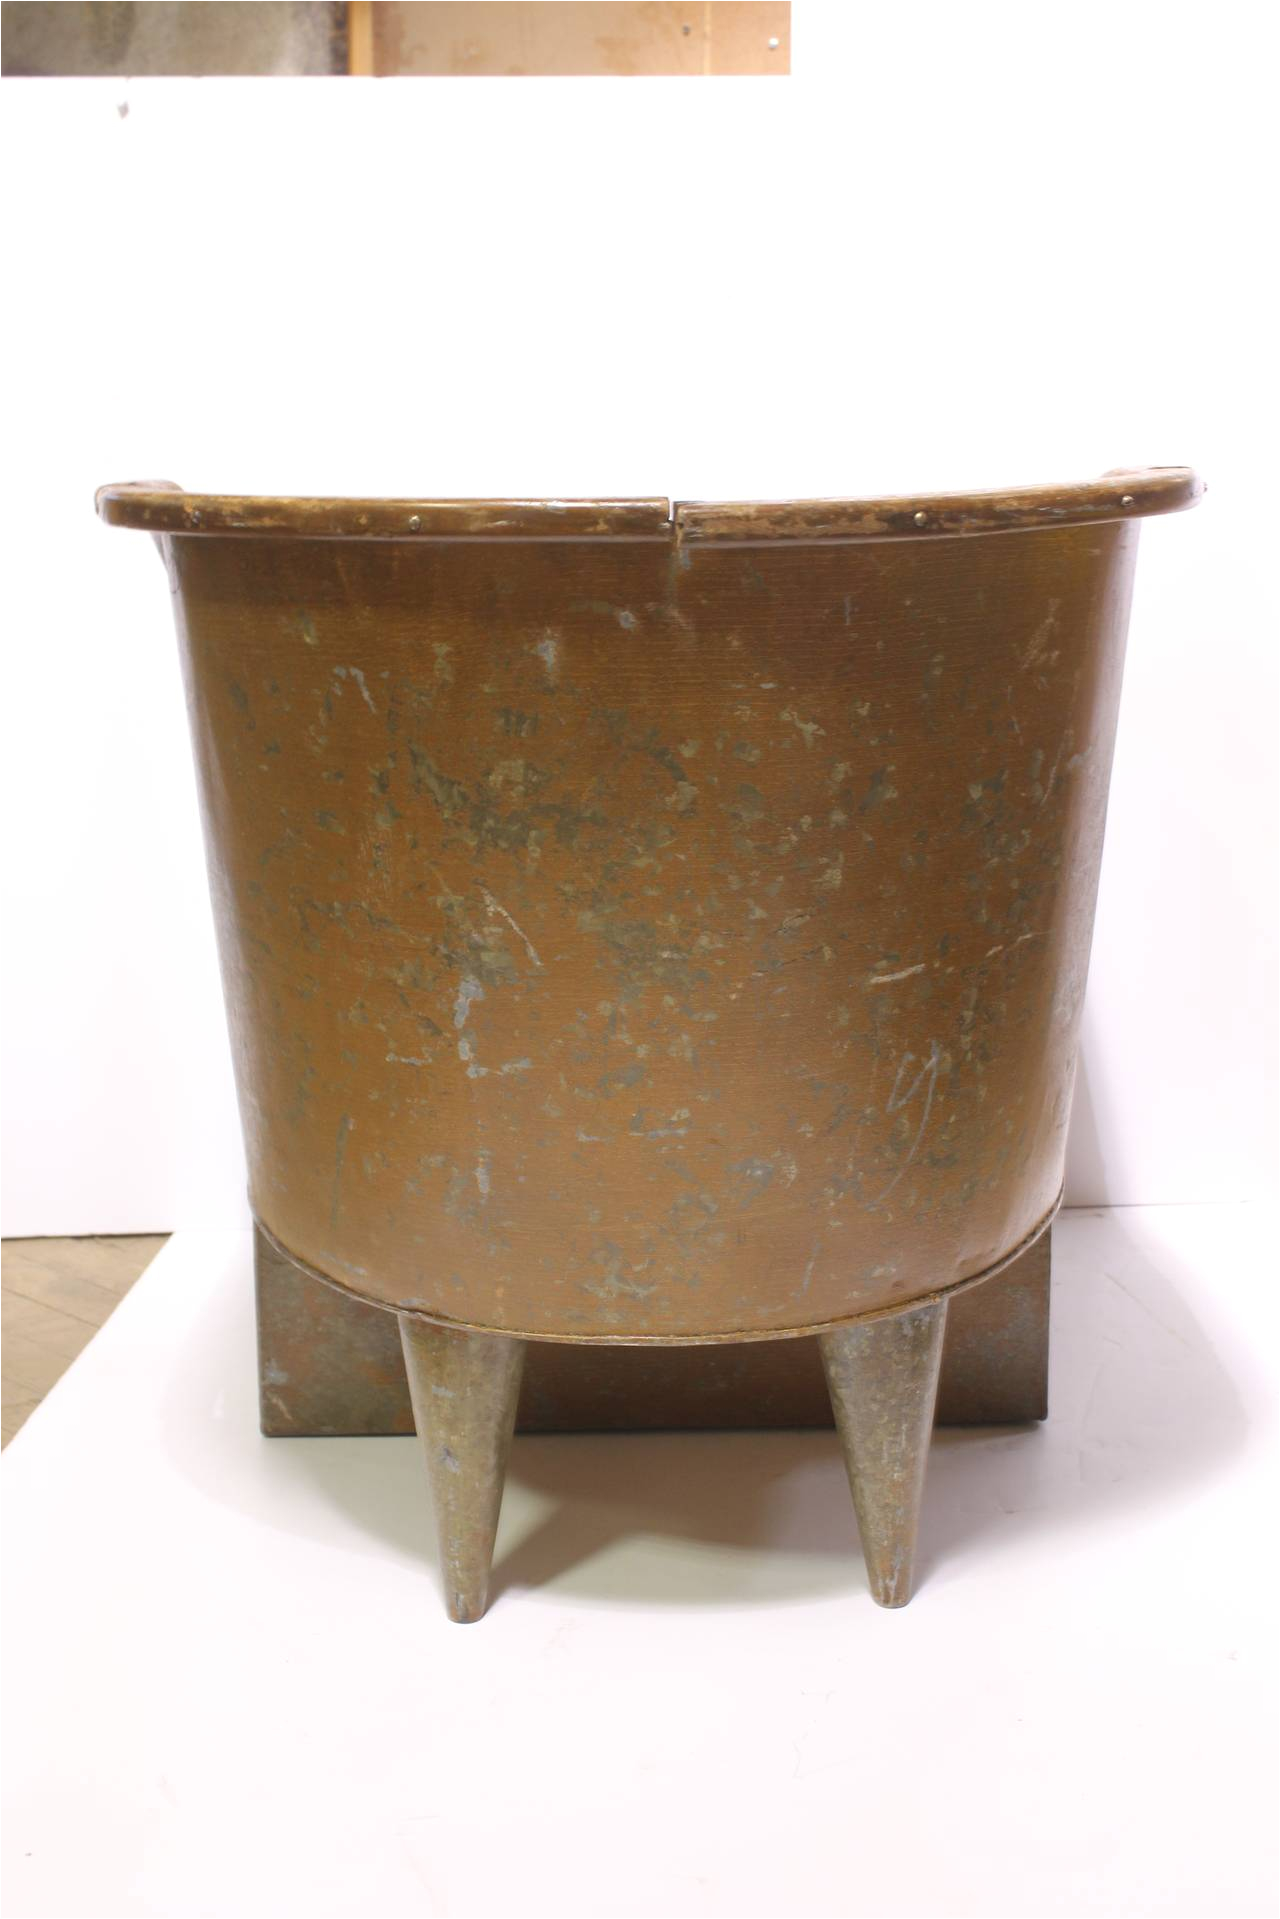 Antique Bathtubs for Sale Antique American Tin Sit Bathtub for Sale at 1stdibs